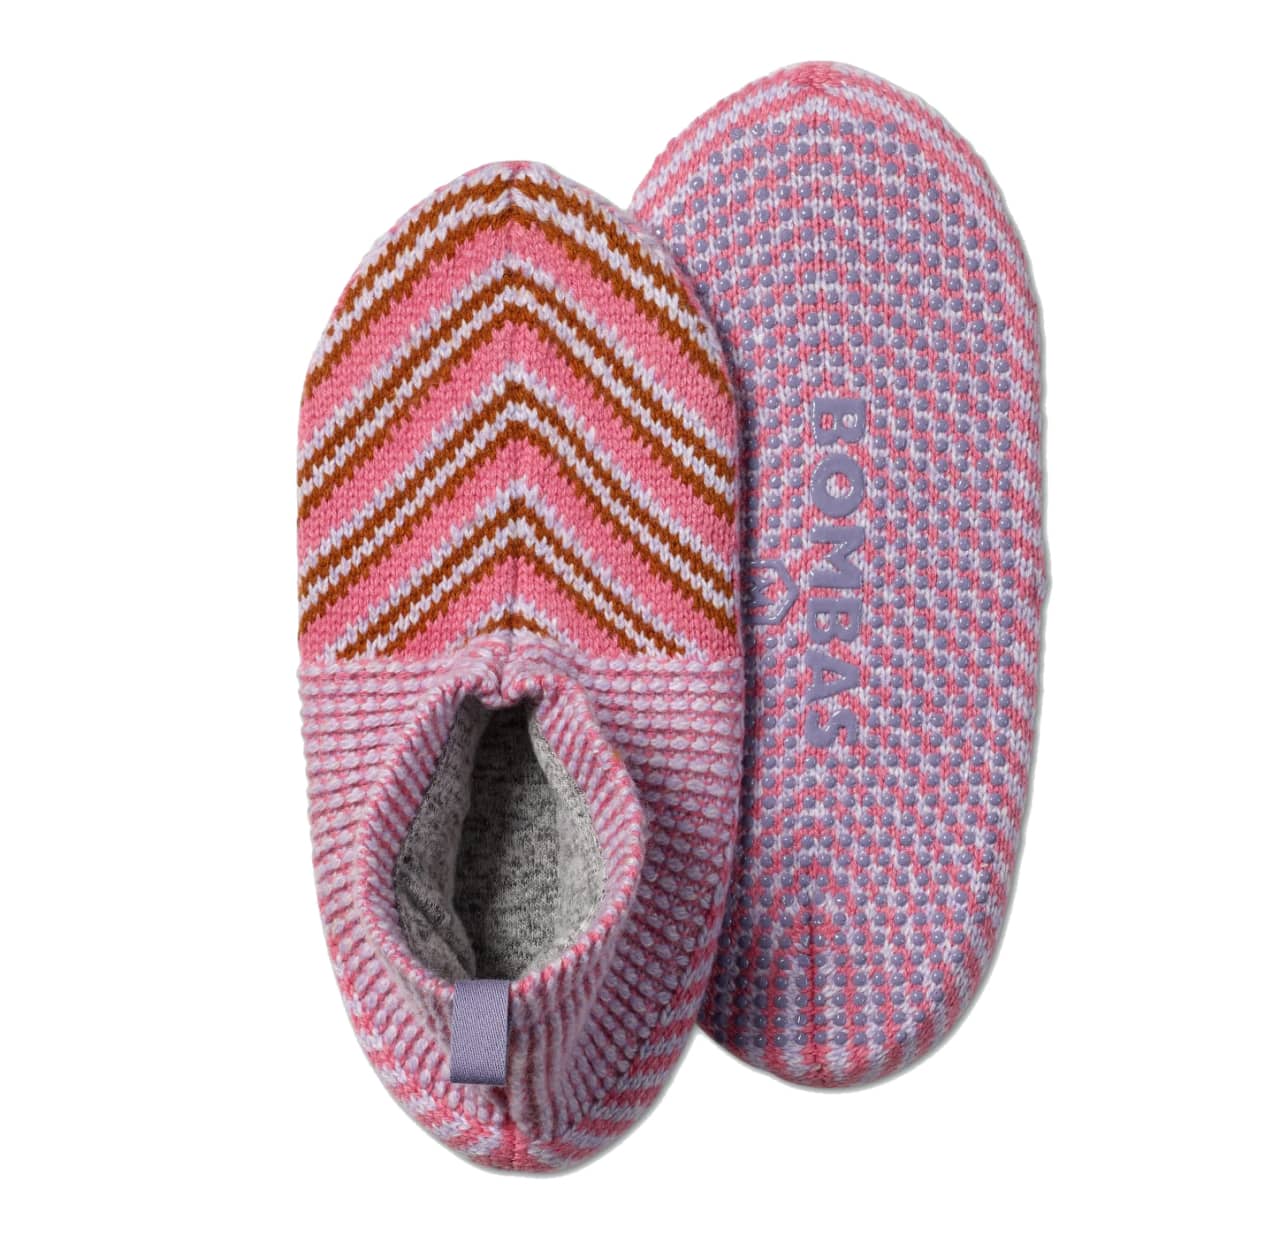 Bombas Gripper Slippers Review: Slippers With Sock-Like Comfort